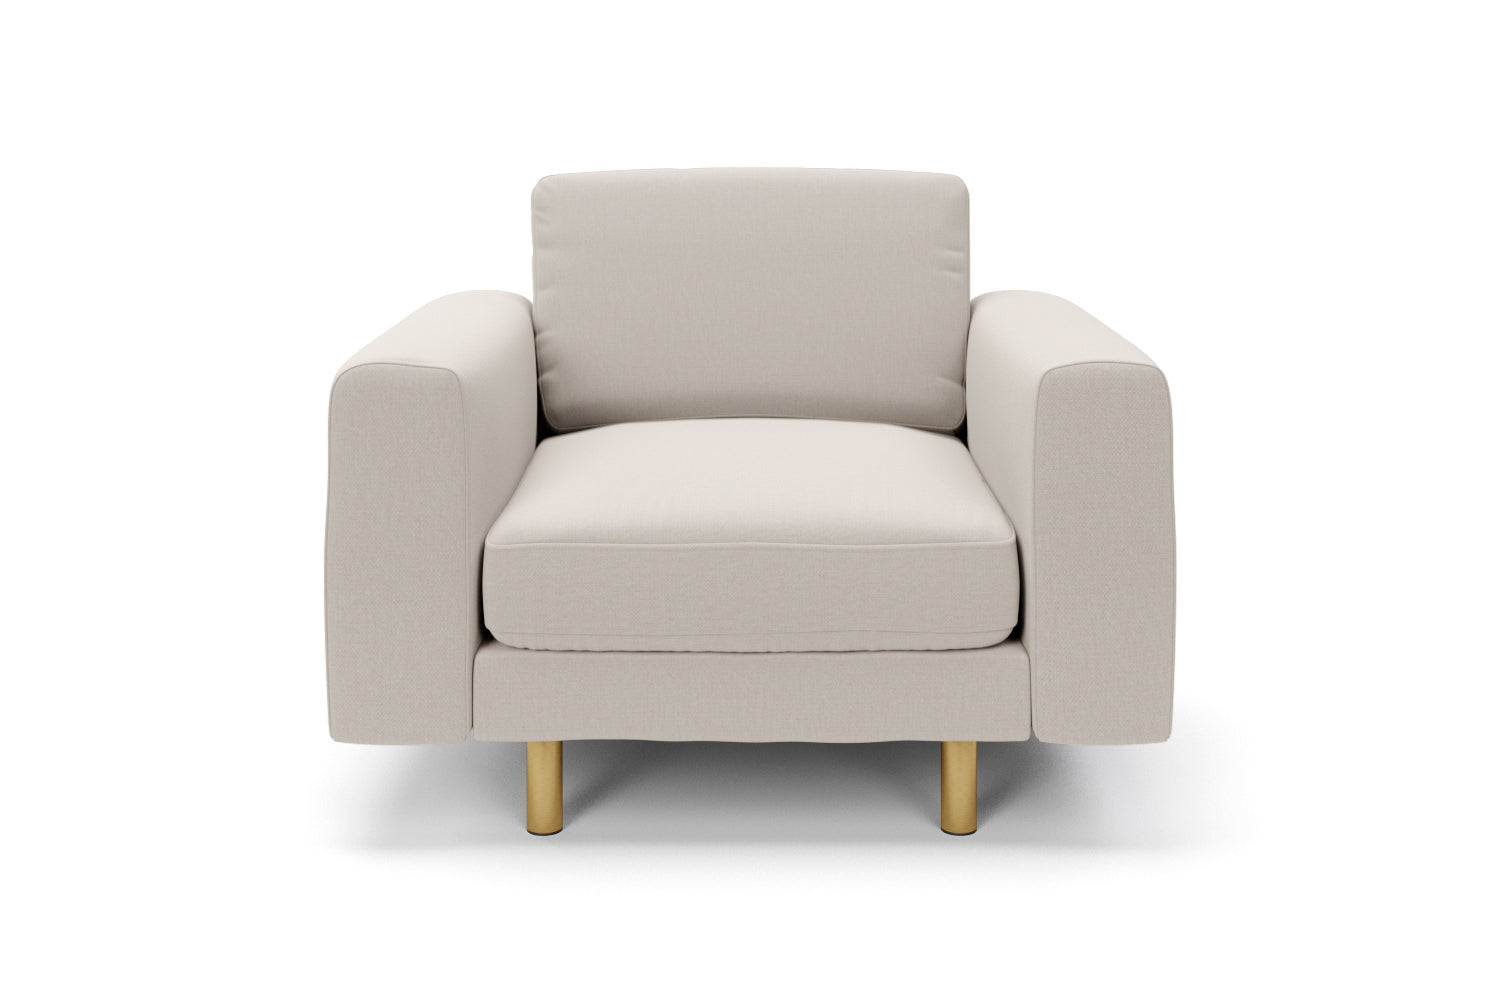 SNUG | The Big Chill 1 Seater Armchair in Biscuit variant_40520423079984